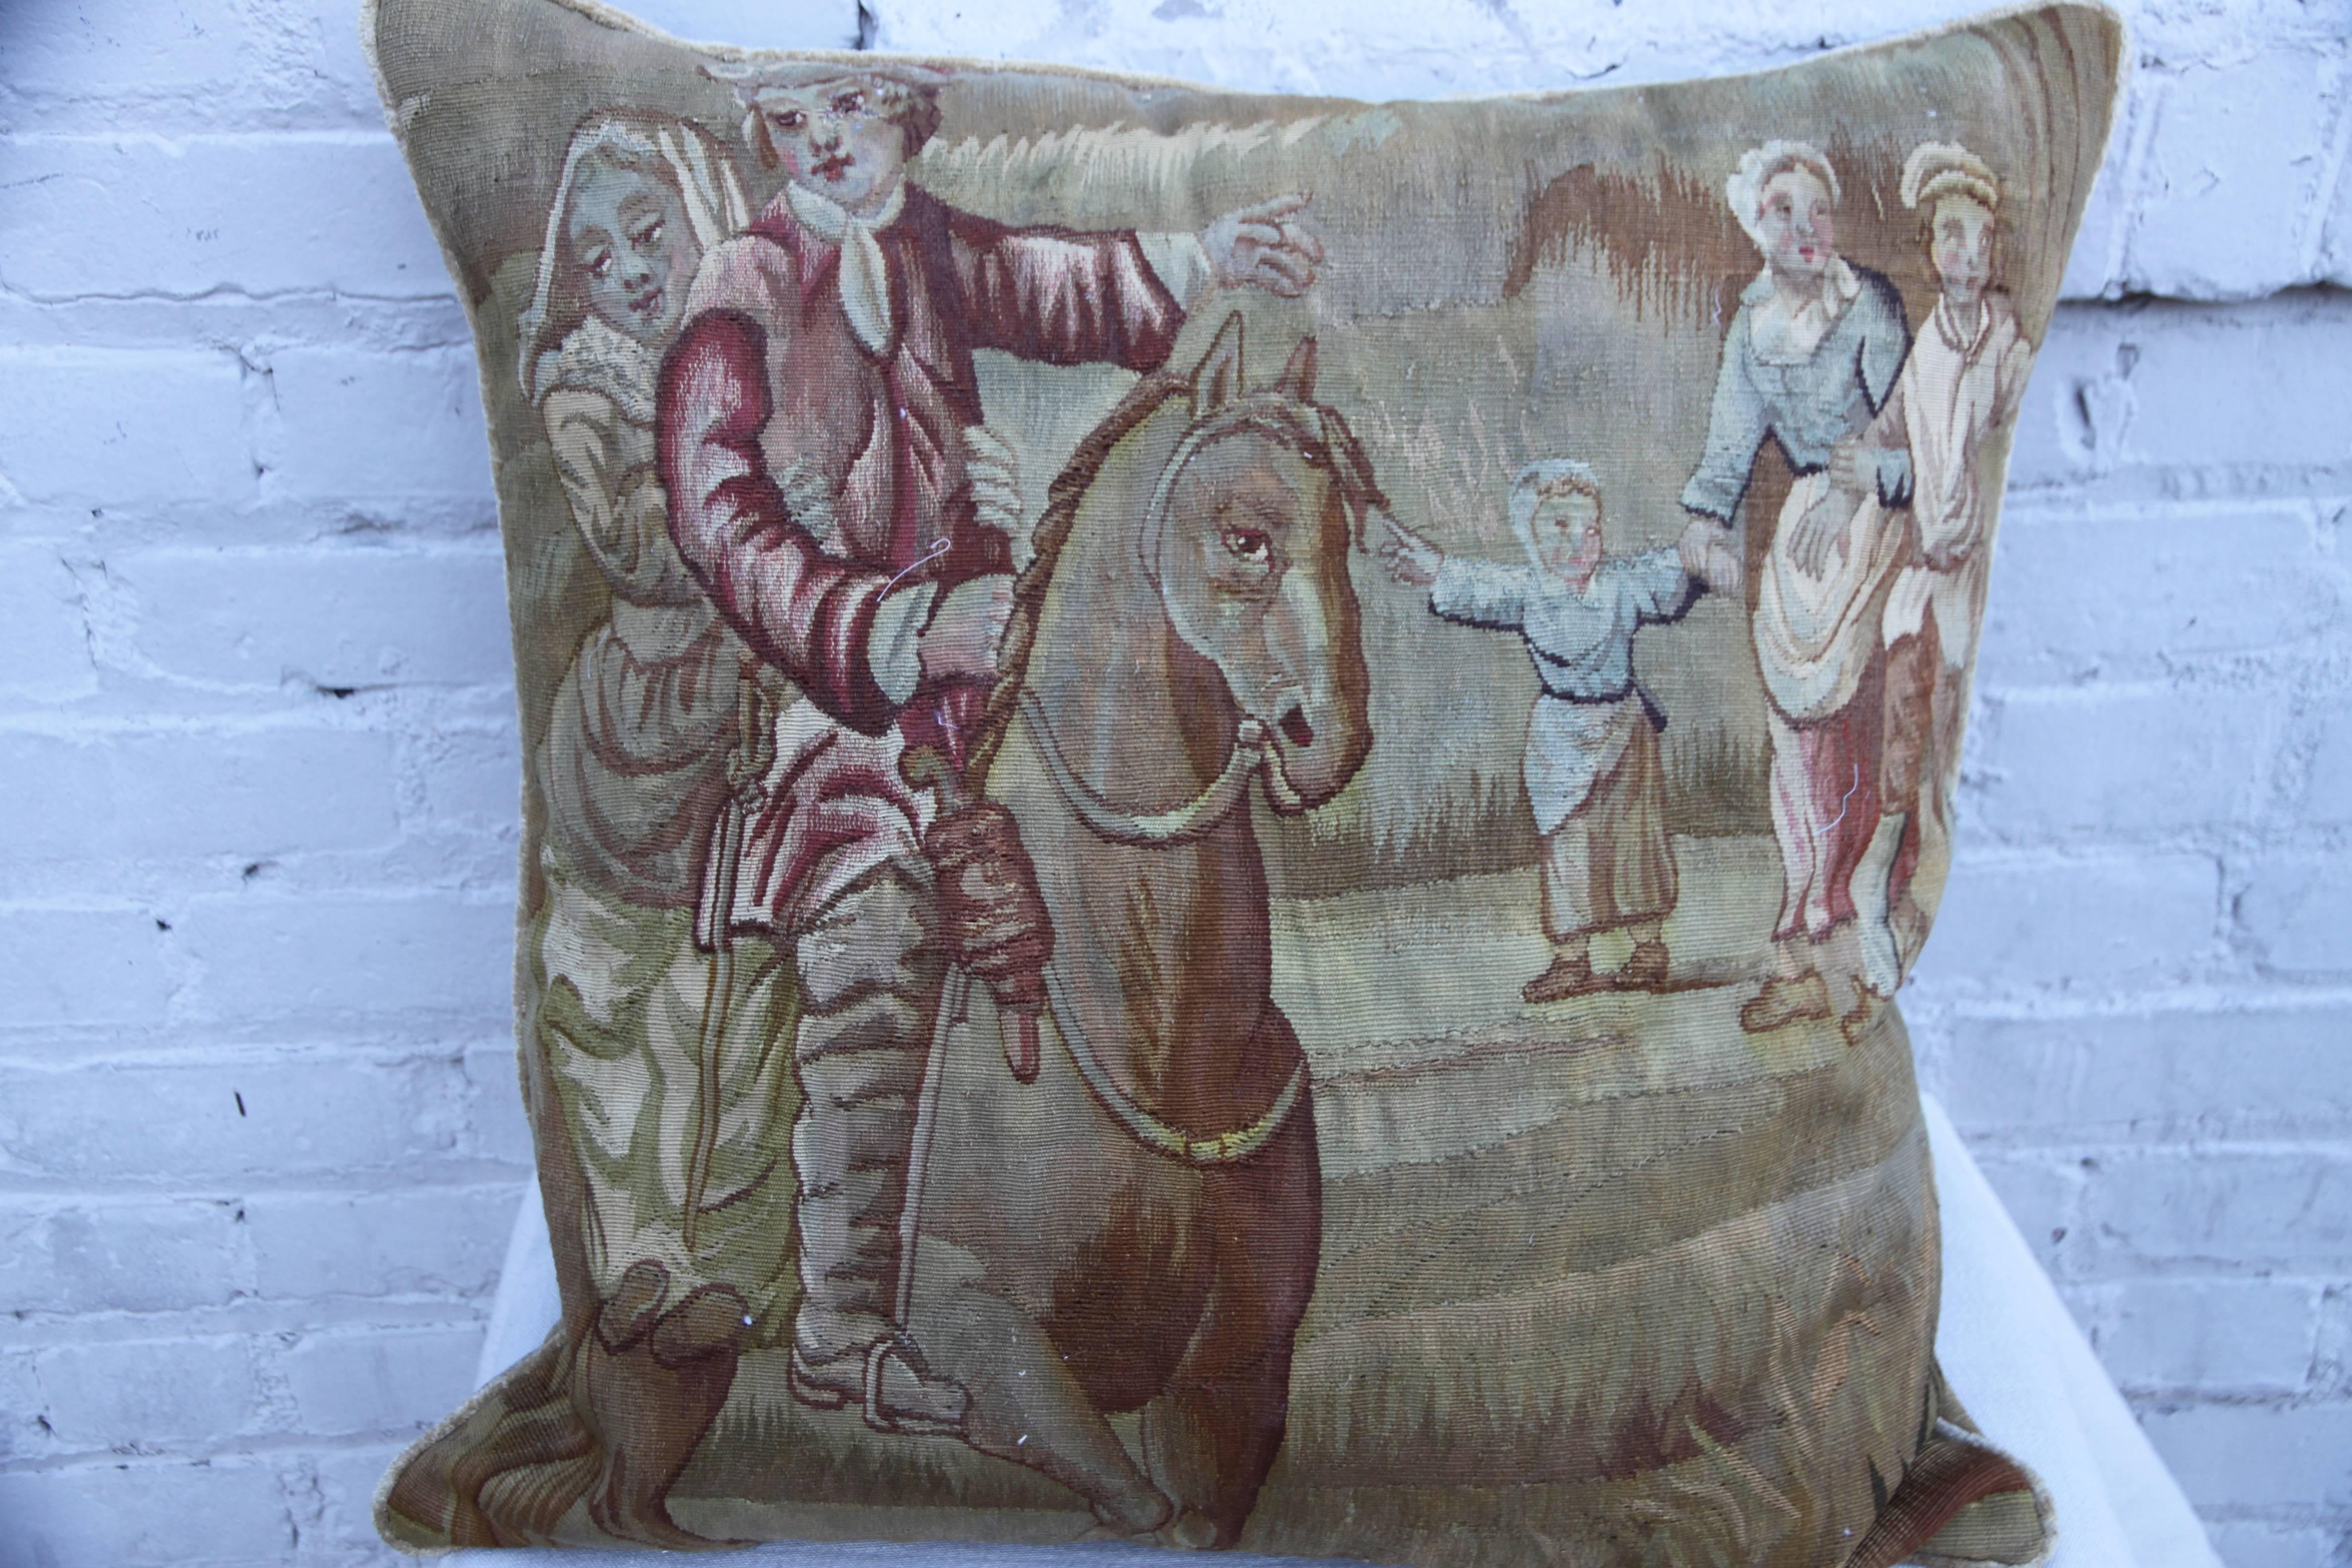 19th century French figural tapestry pillow depicting a couple on horseback with a family of onlookers in the background. Soft gold colored linen velvet back with self cord detail. Down insert, sewn shut.